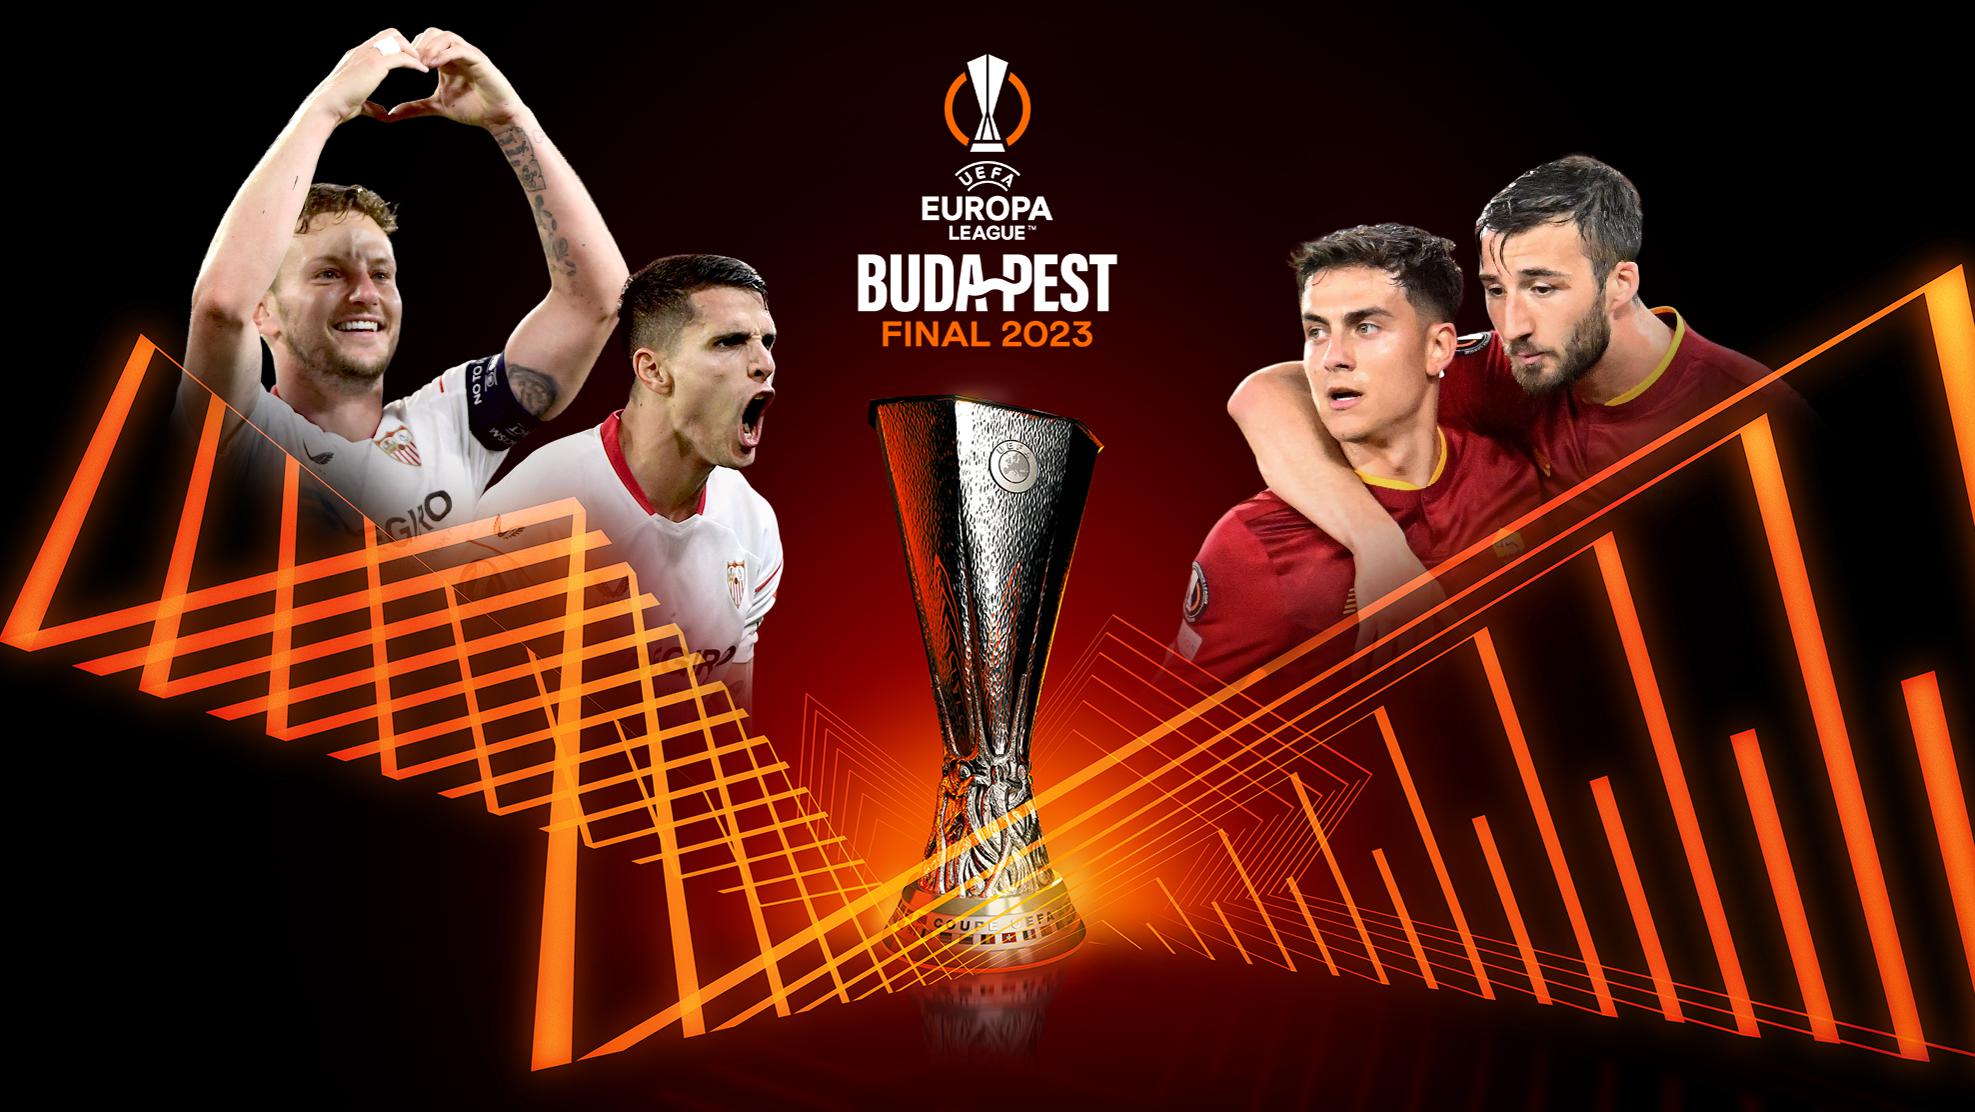 ⚽️ 2022/23 Europa League Final Preview, Stats, Results, Live Updates and More - Football